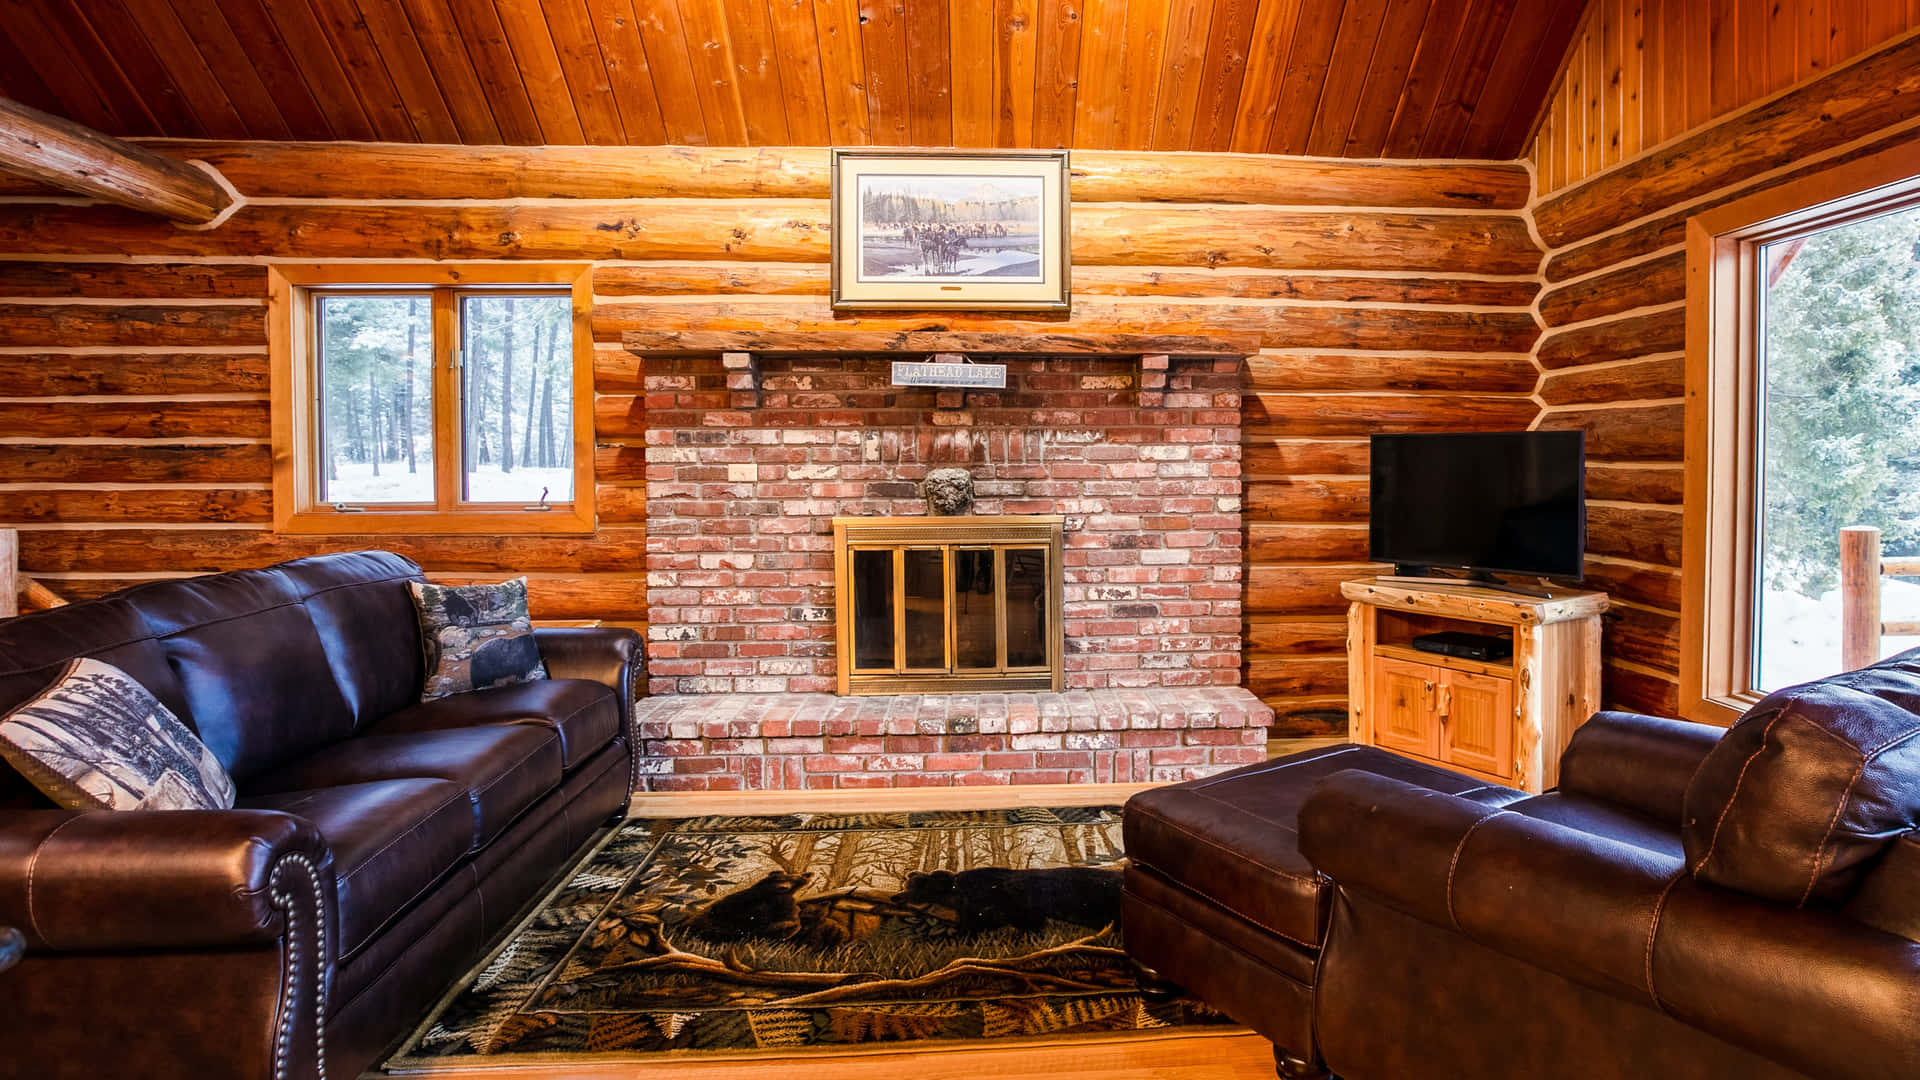 Fireplace Zoom Background Wooden Walls